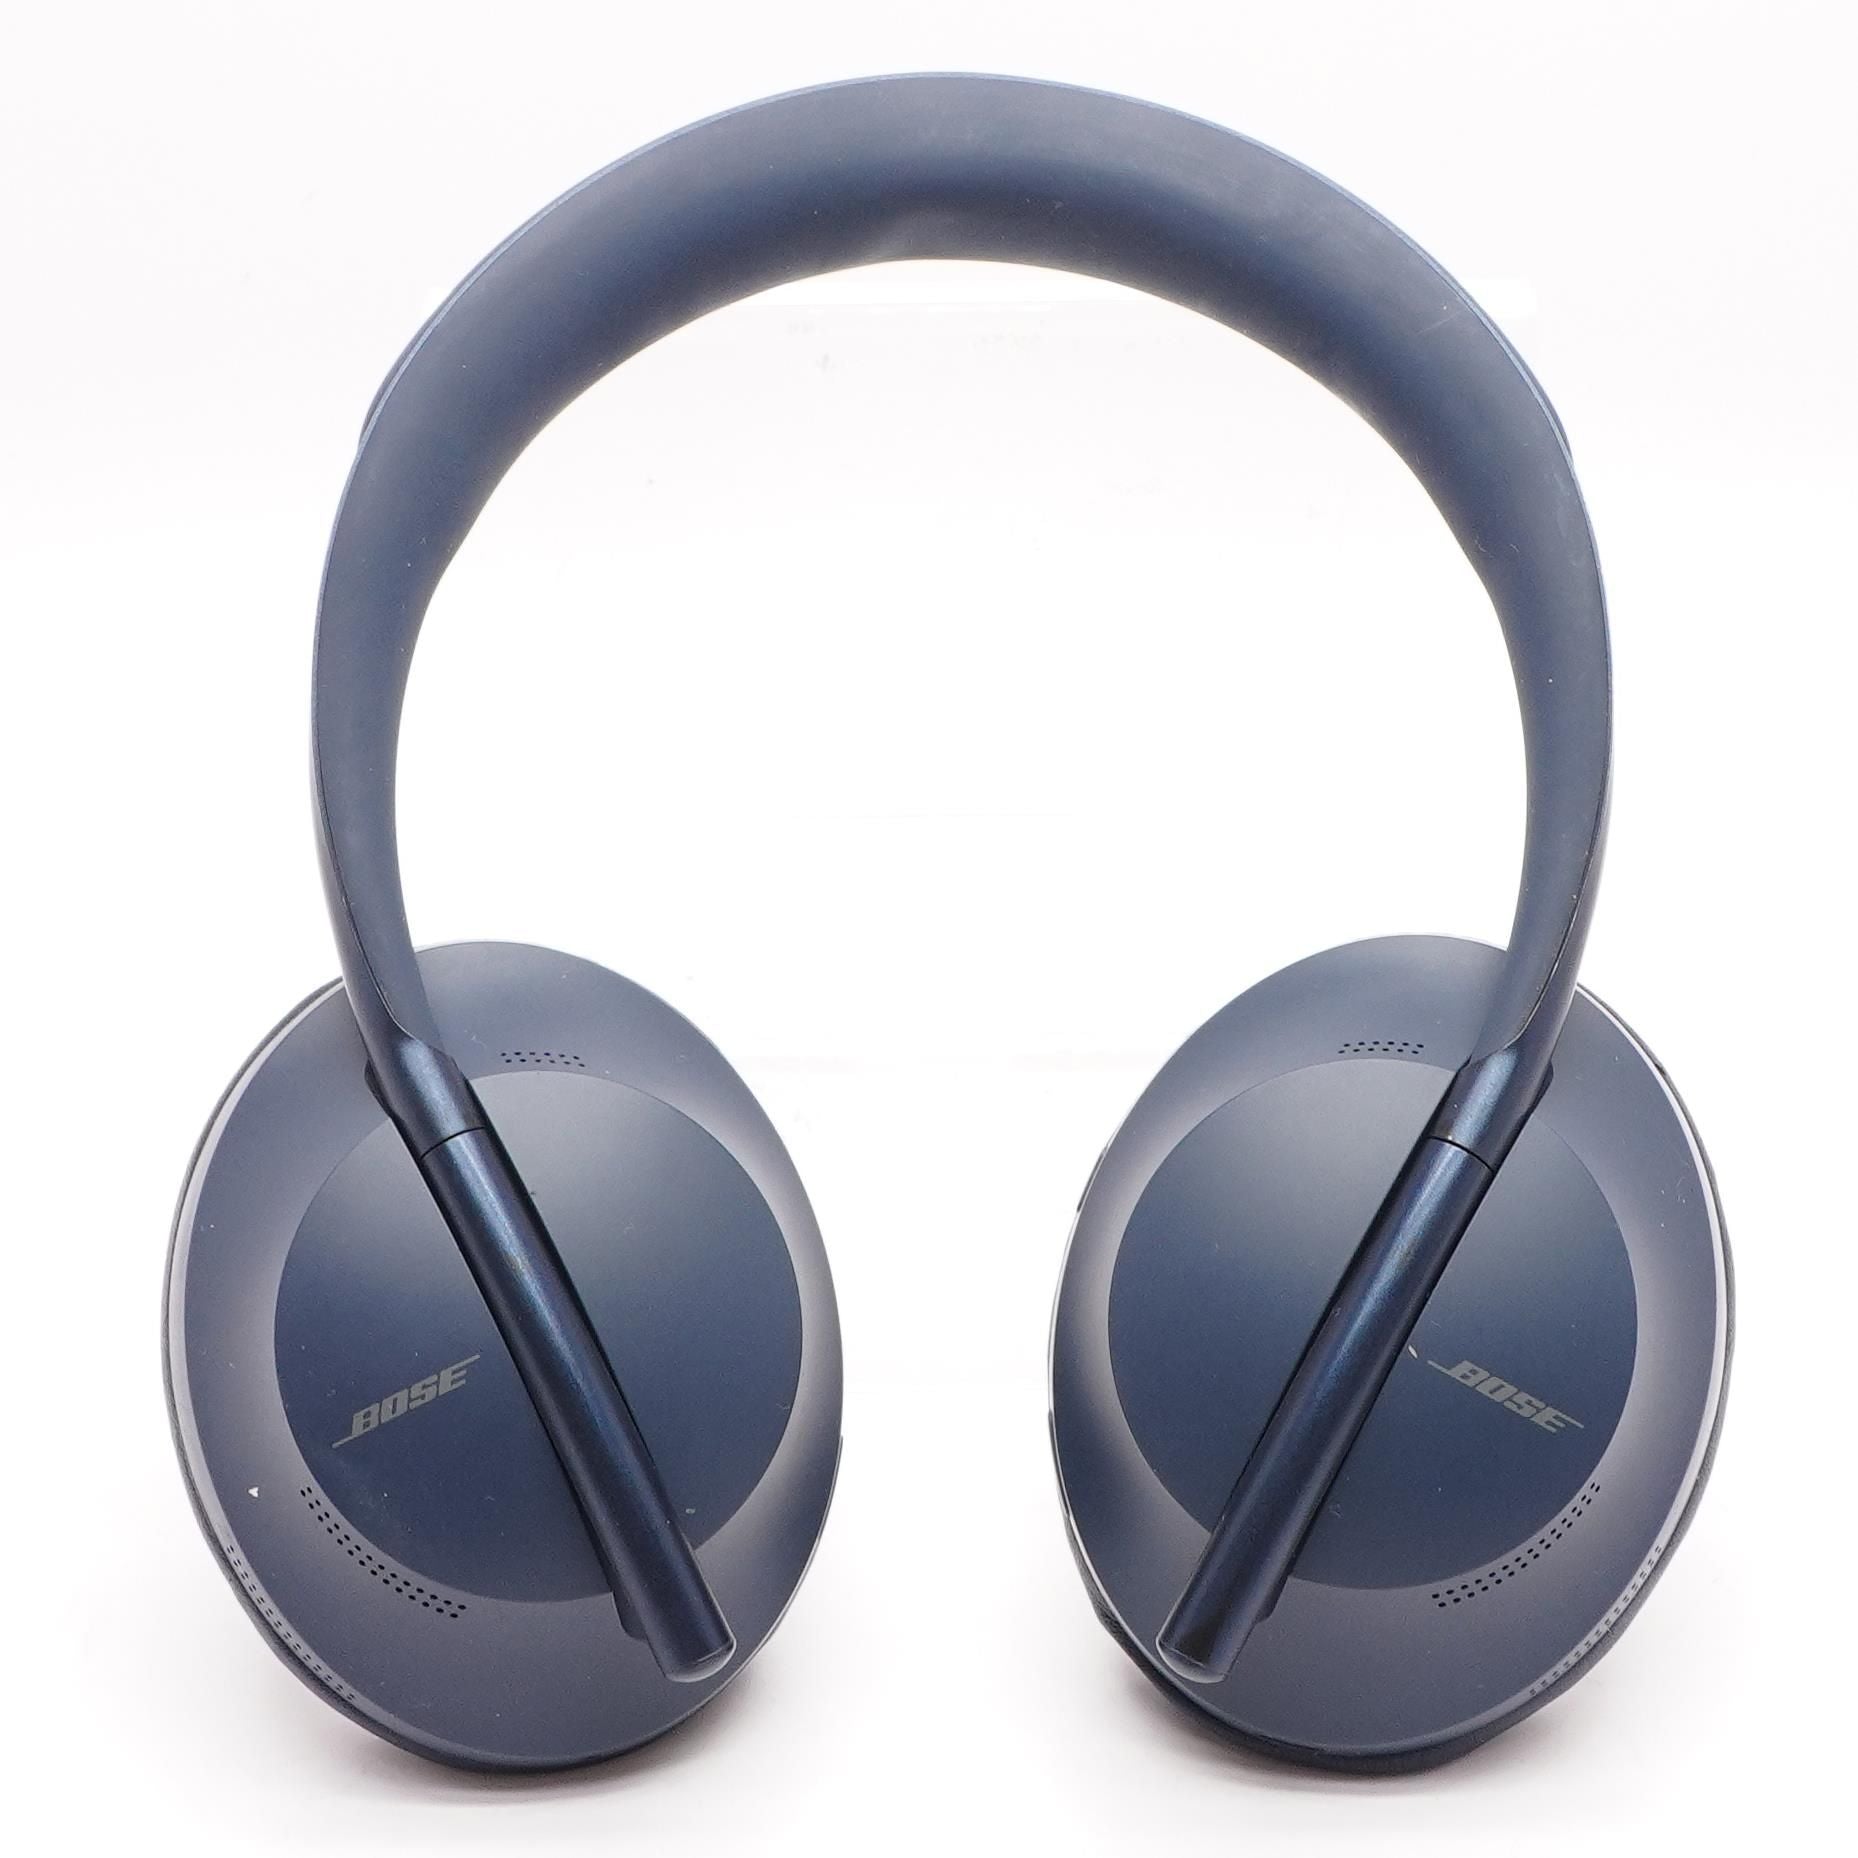 Triple Midnight 700 Noise Cancelling Headphones